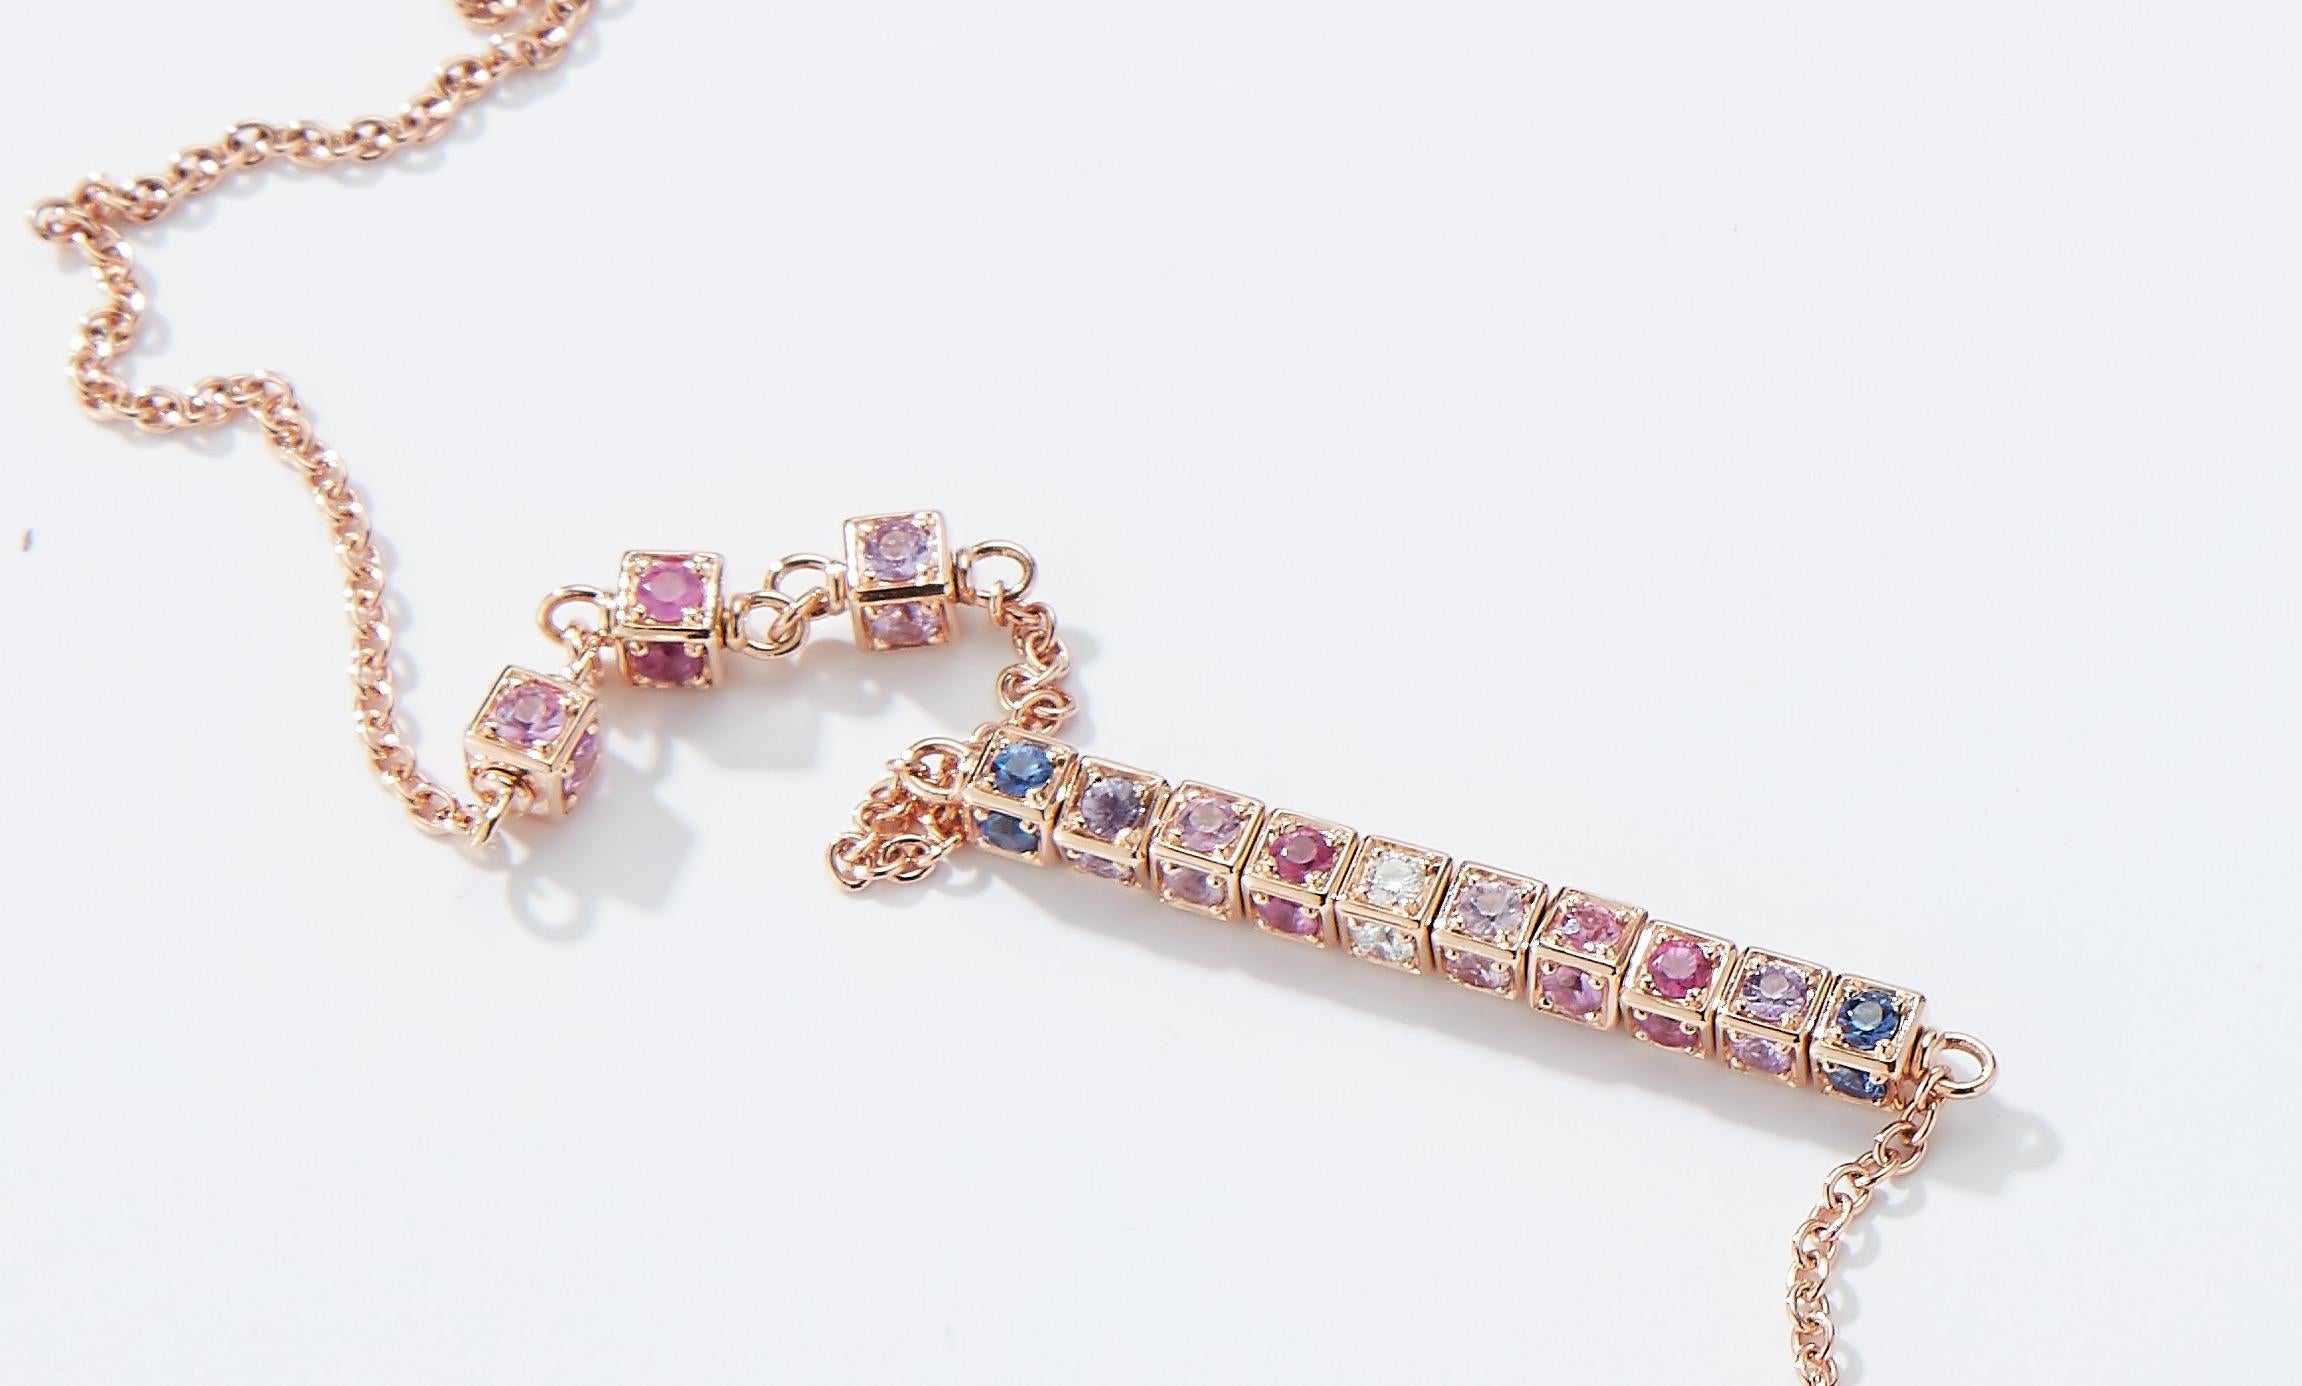 Faro long necklace in 18K rose gold with rotating cube elements set with multi colored sapphires (approx. 12.04 carats) and white diamonds (approx. 0.80 carats)
